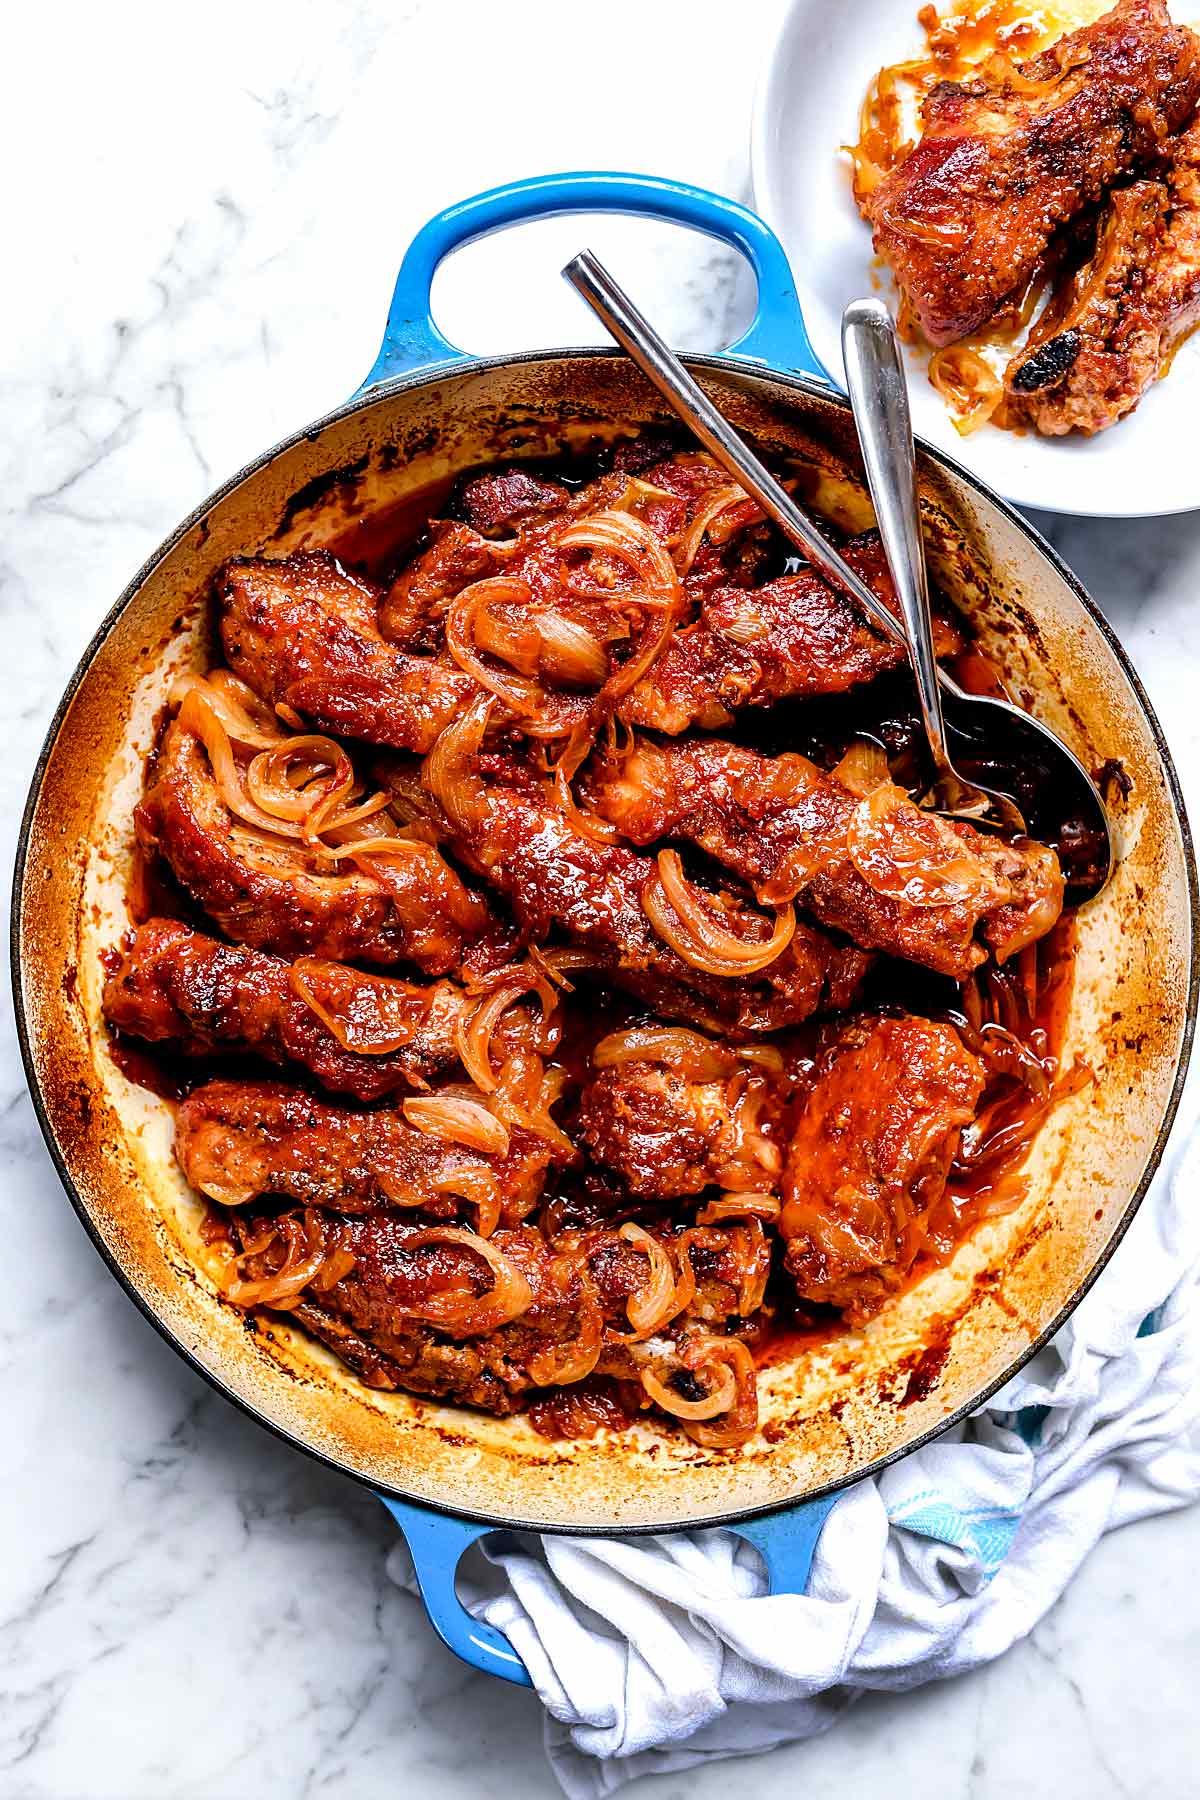 https://www.foodiecrush.com/oven-spare-ribs/grandmas-oven-braised-spare-ribs-foodiecrush-com-020/